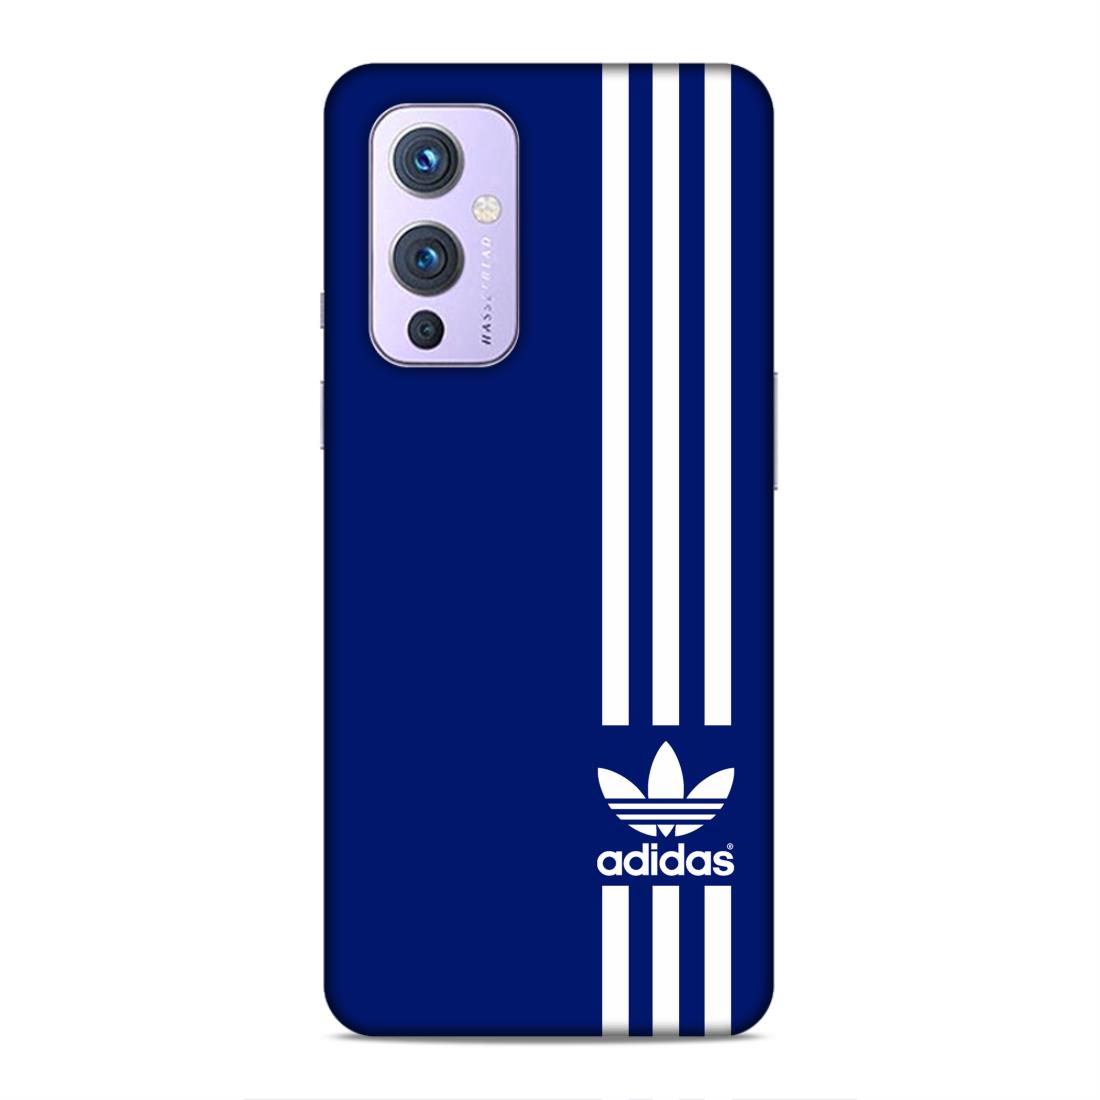 Adidas in Blue Hard Back Case For OnePlus 9